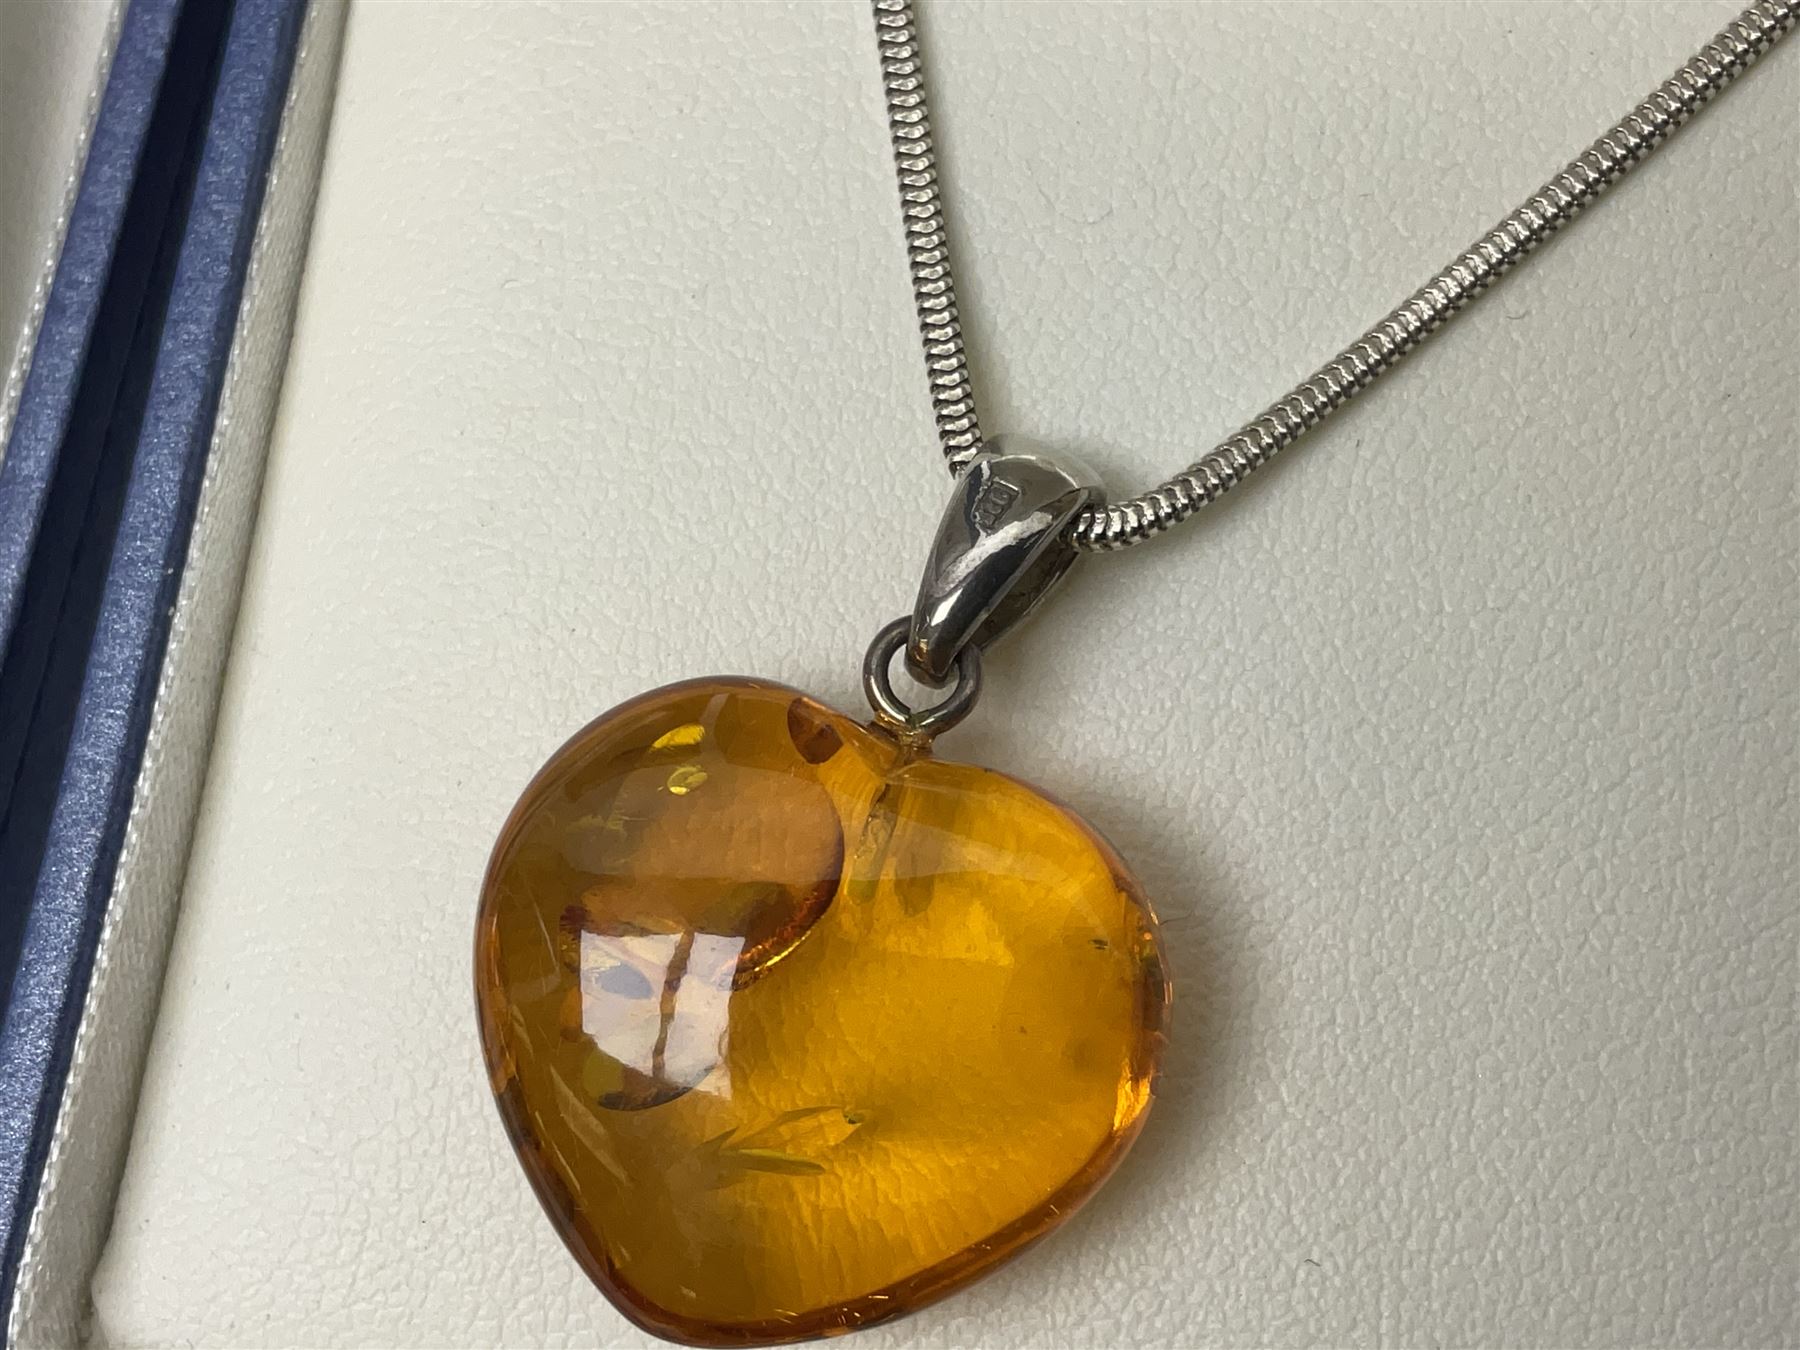 Silver Baltic amber jewellery - Image 4 of 11